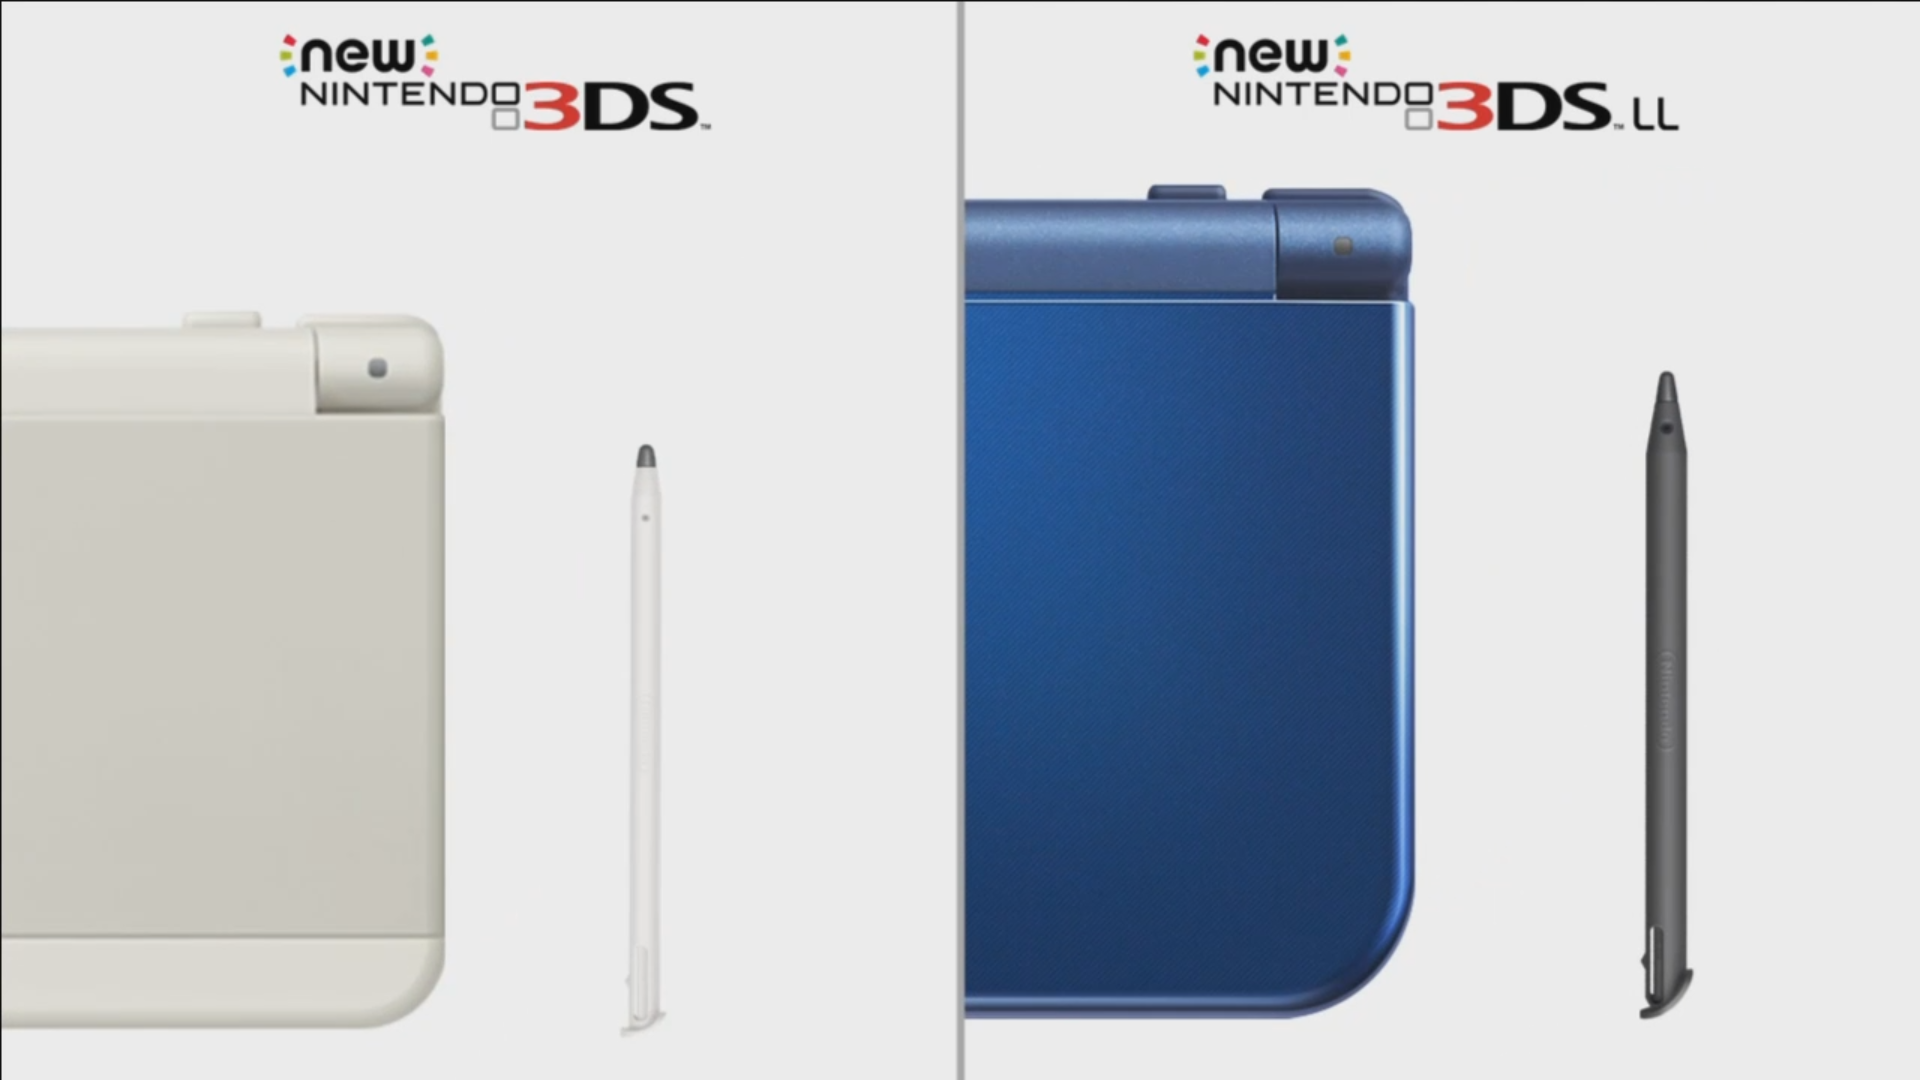 Nintendo Just Announced A New 3DS, And It Has Another Analogue Stick